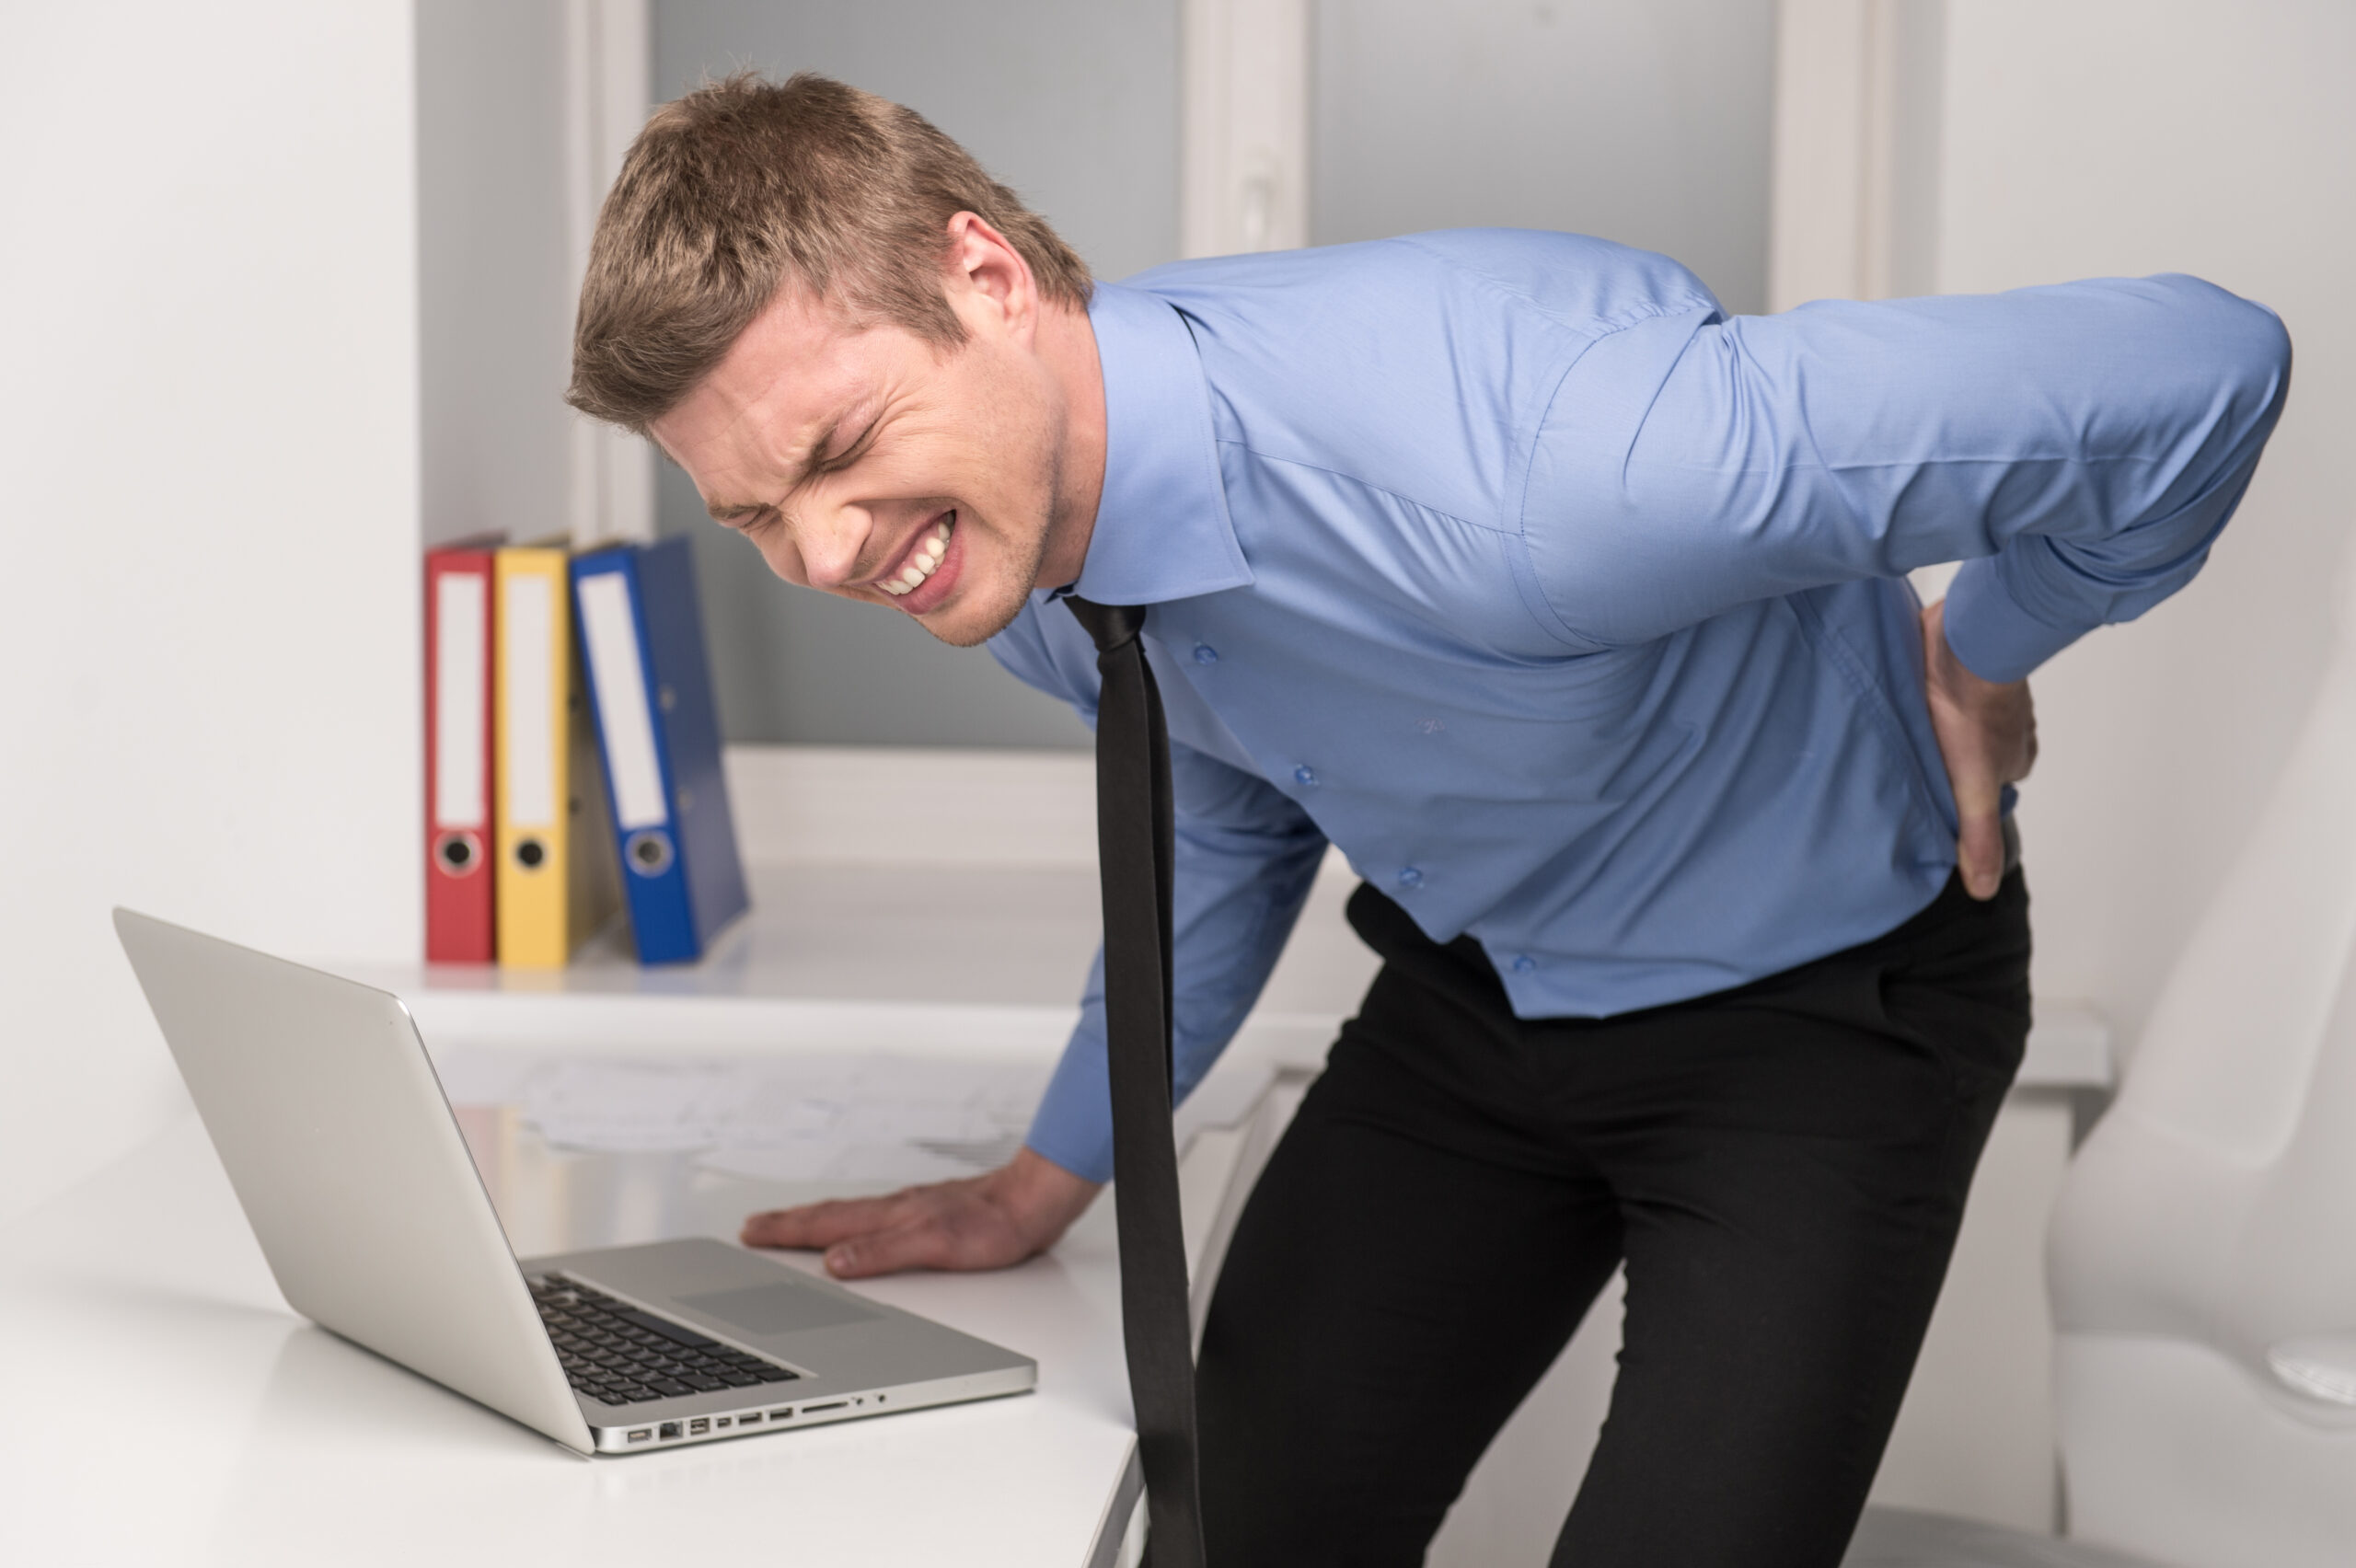 Why Does My Back Hurt At the Office Desk?